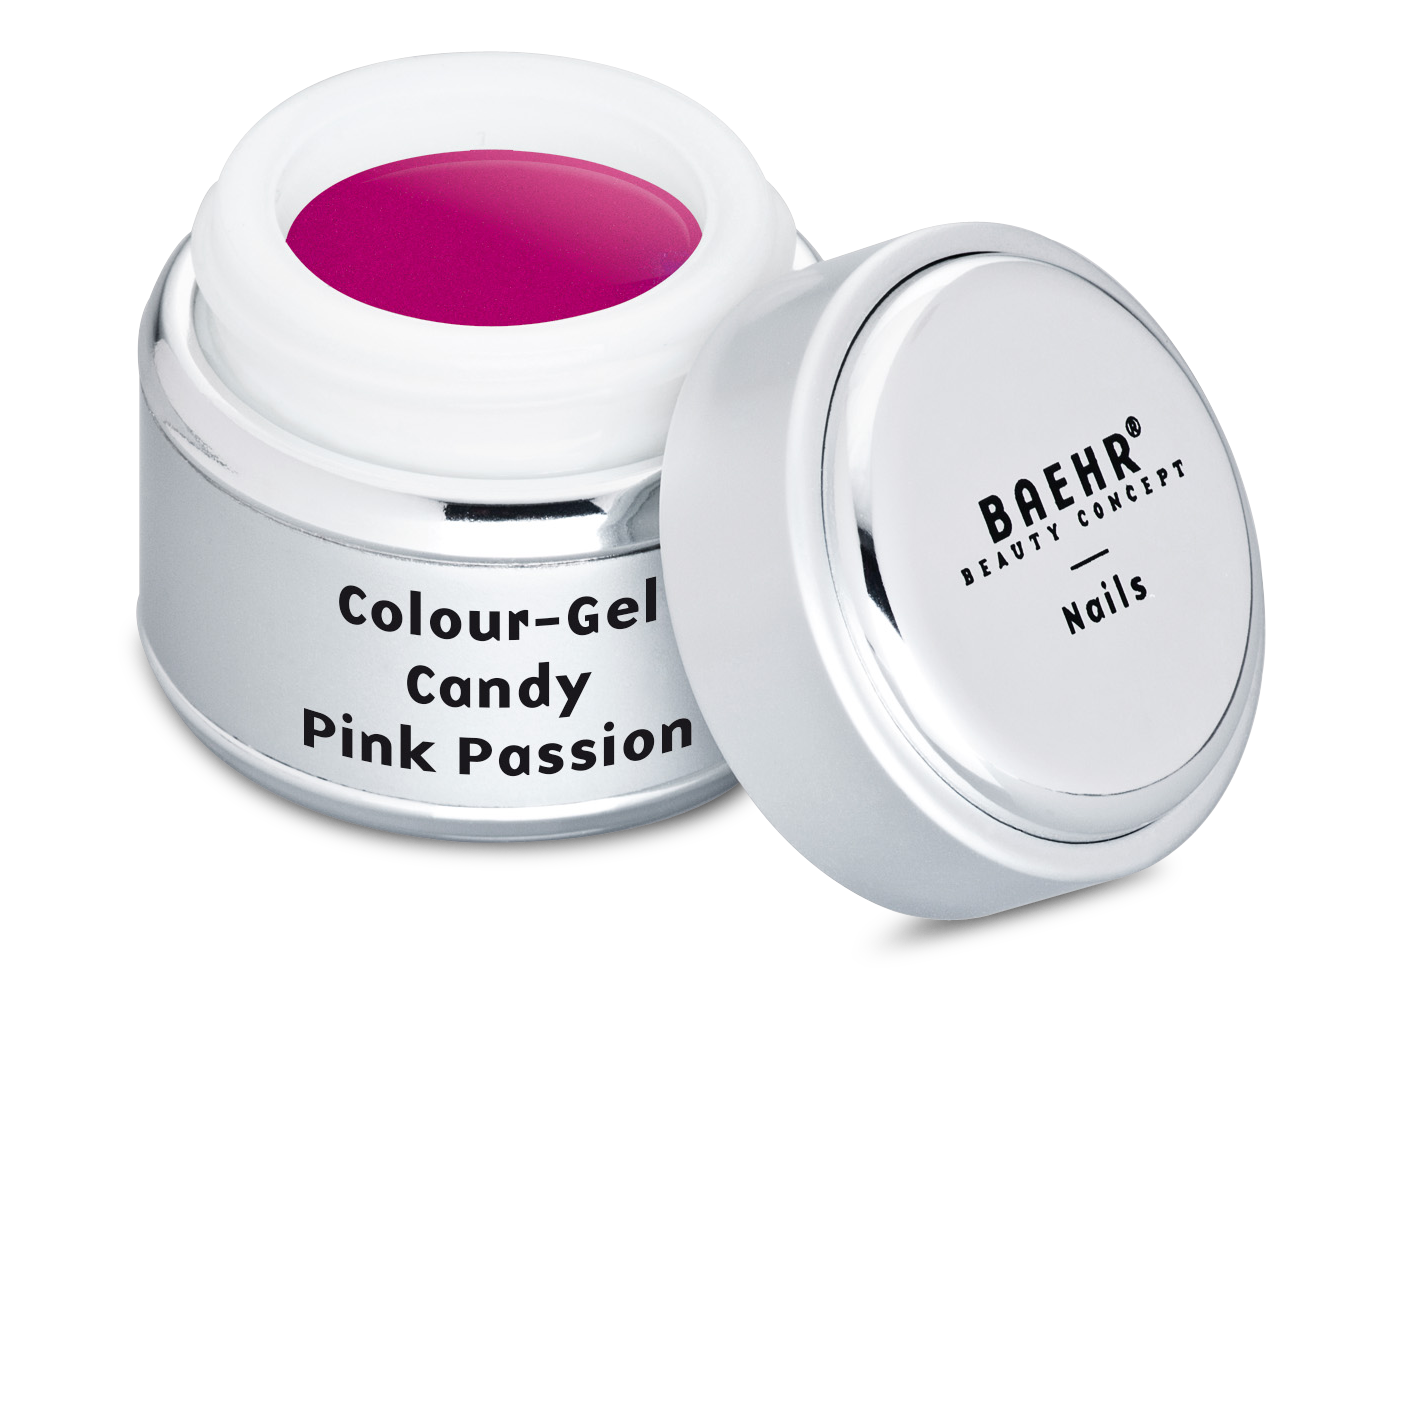 colour-gel-candy-pink-passion_26373